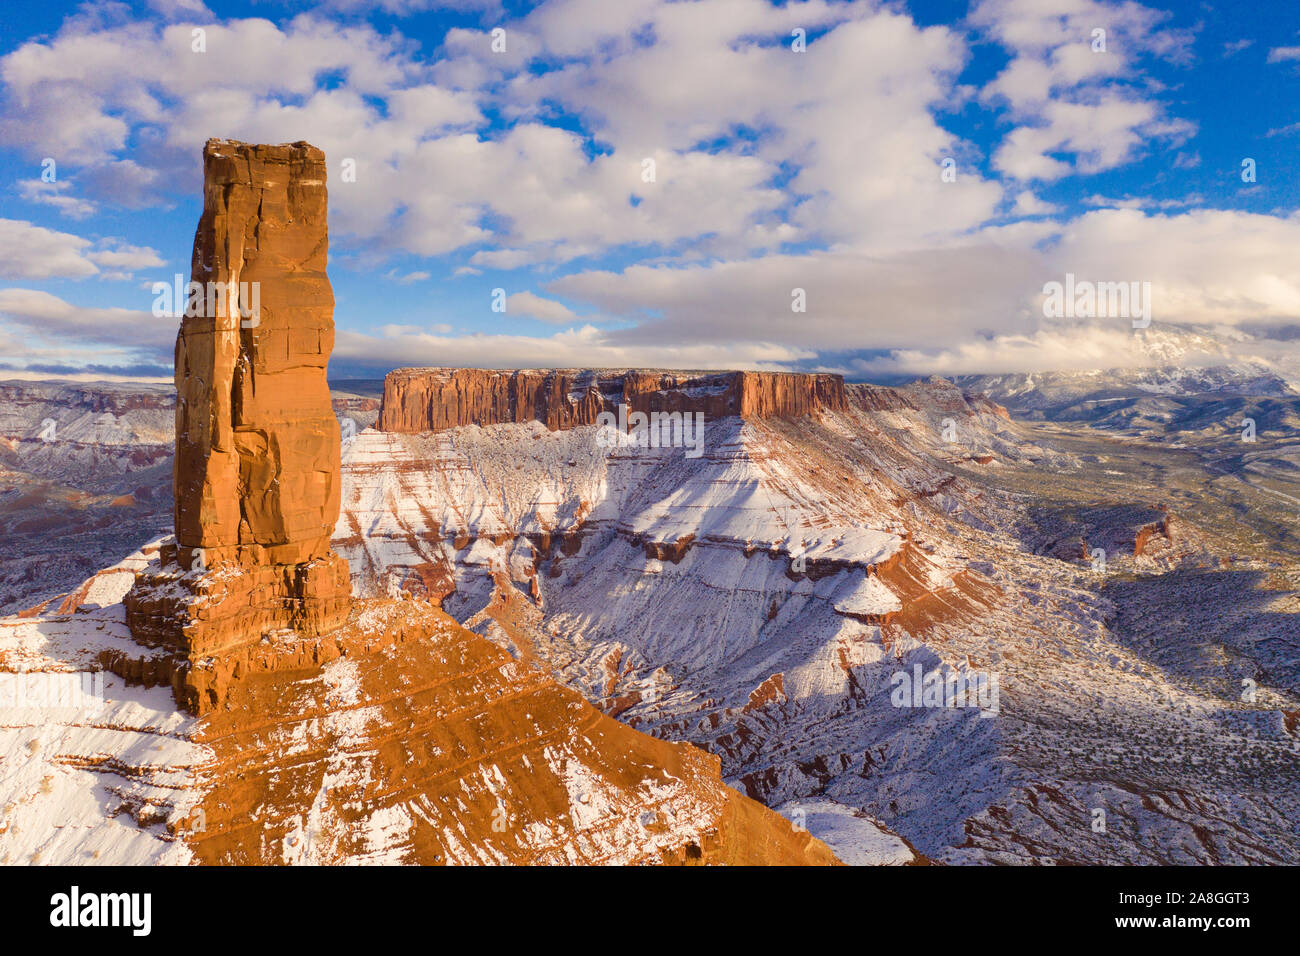 Clouds and snow at Castle Rock, proposed La Sa Waters Wilderenss, Utah, Castle Valley, Colorado River near Moab, Utah Stock Photo